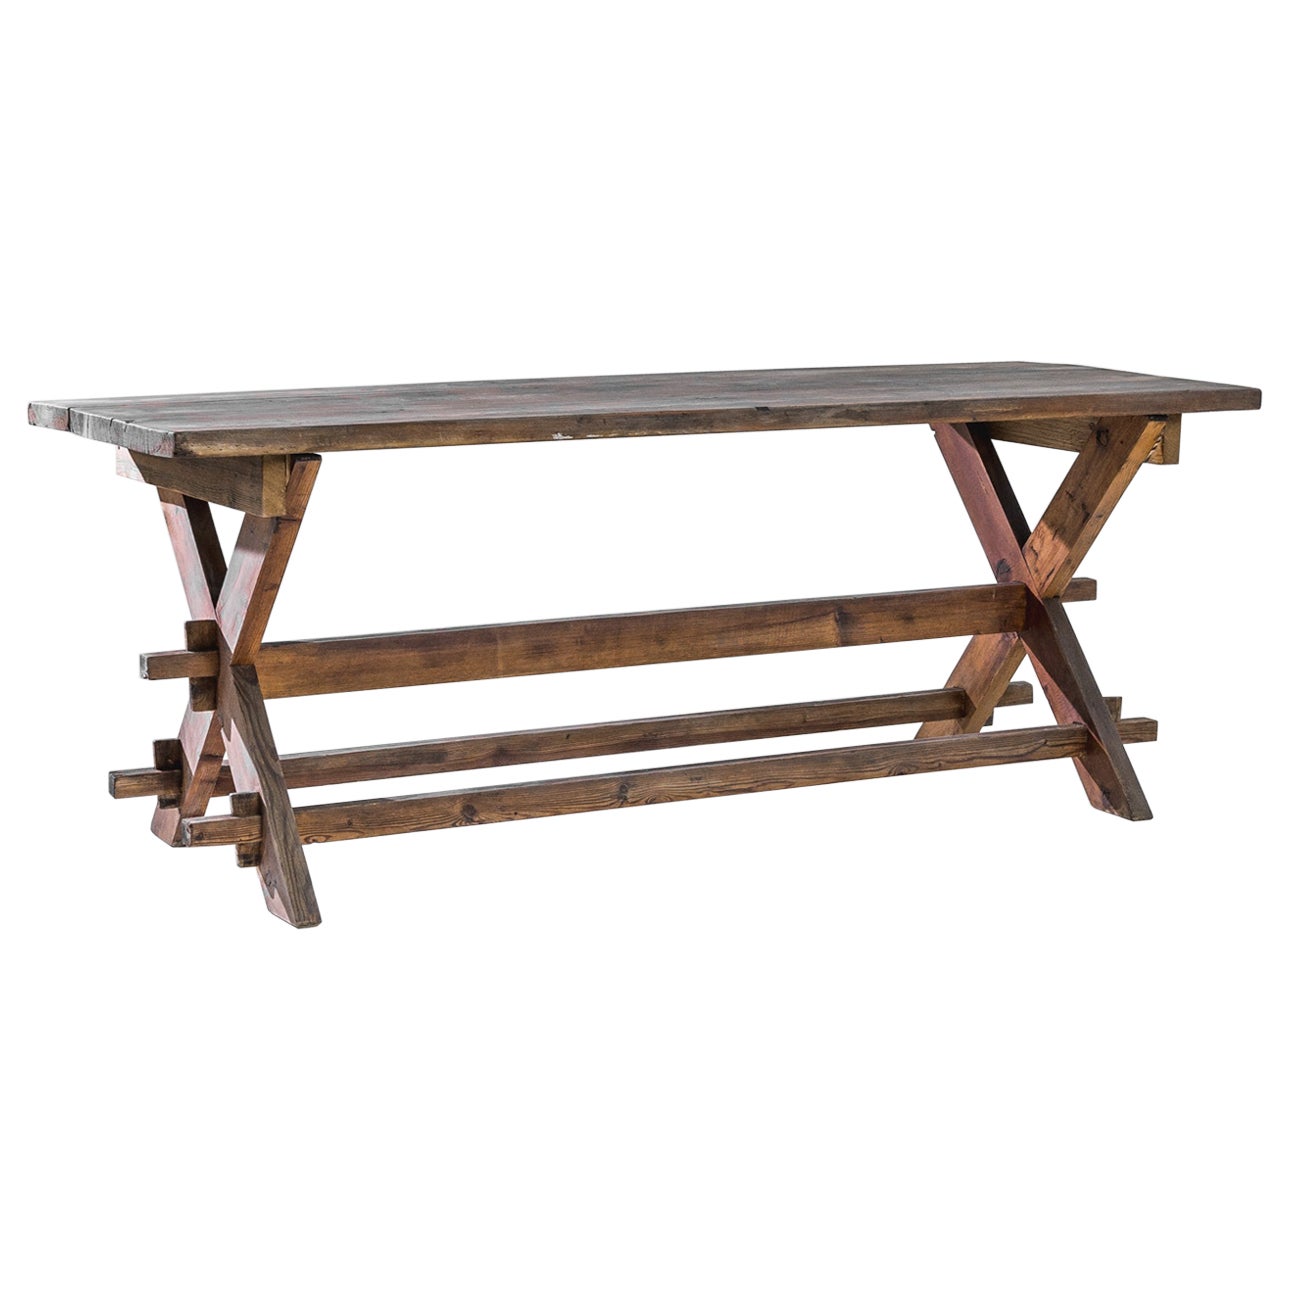 20th Century, Scandinavian Country Dining Table